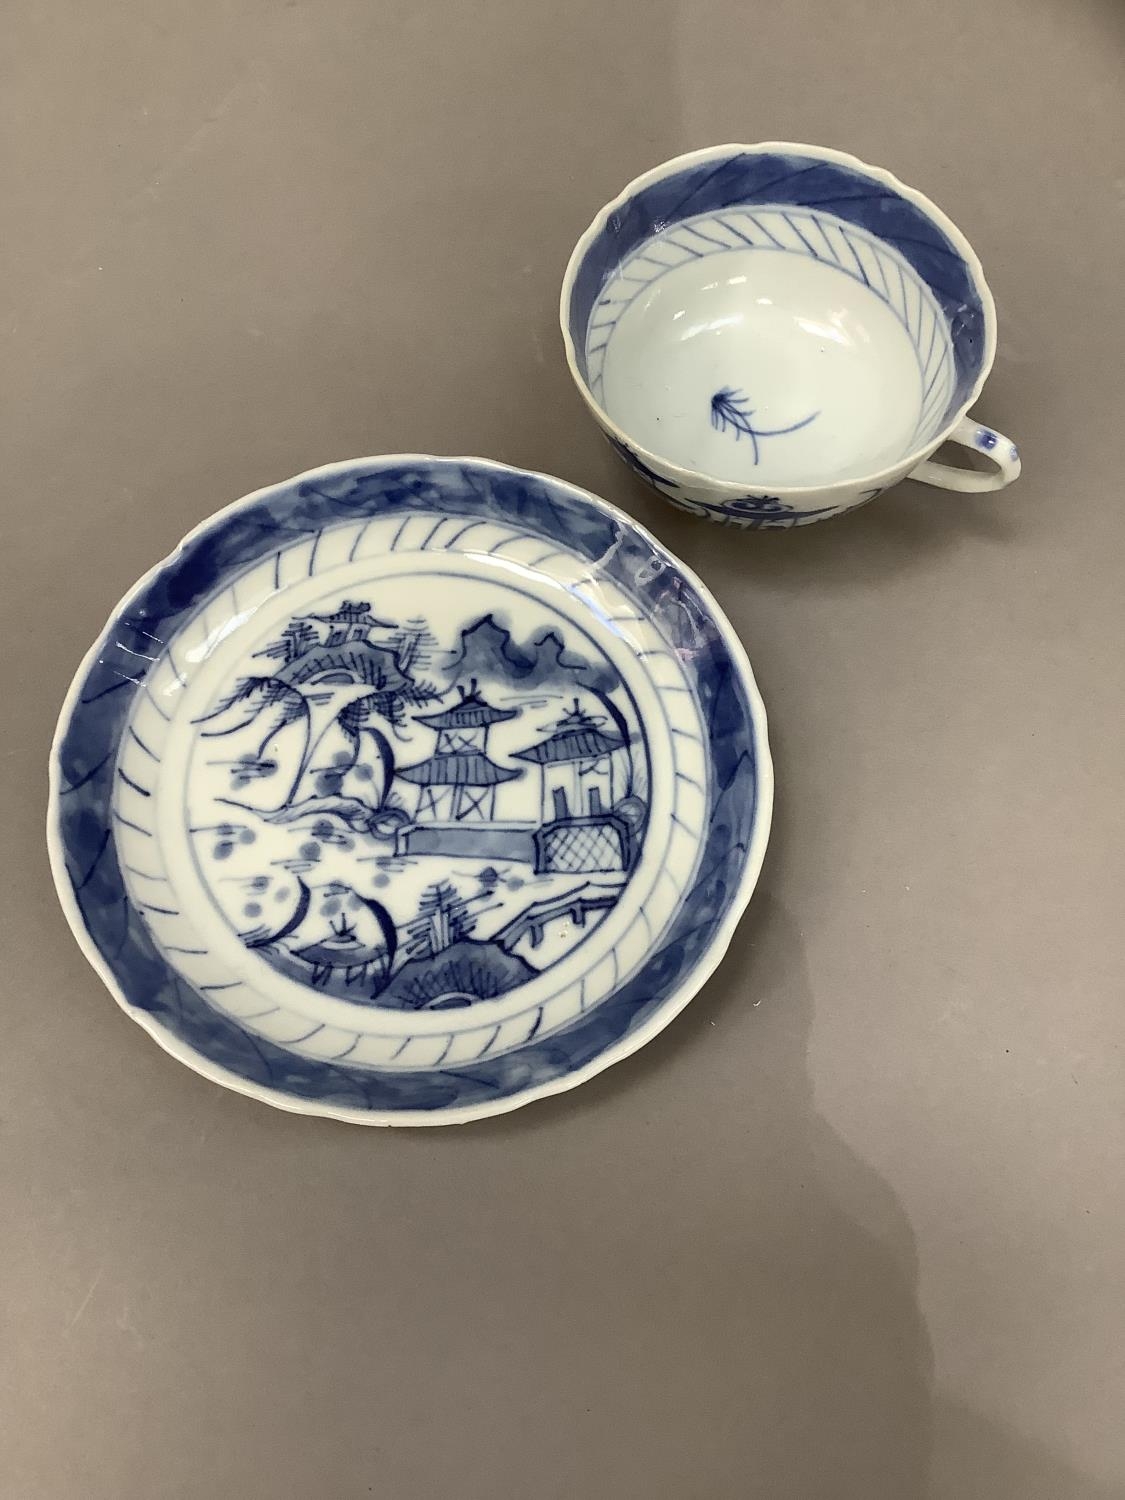 A Chinese blue and white cup and saucer painted with a pagoda and island scene